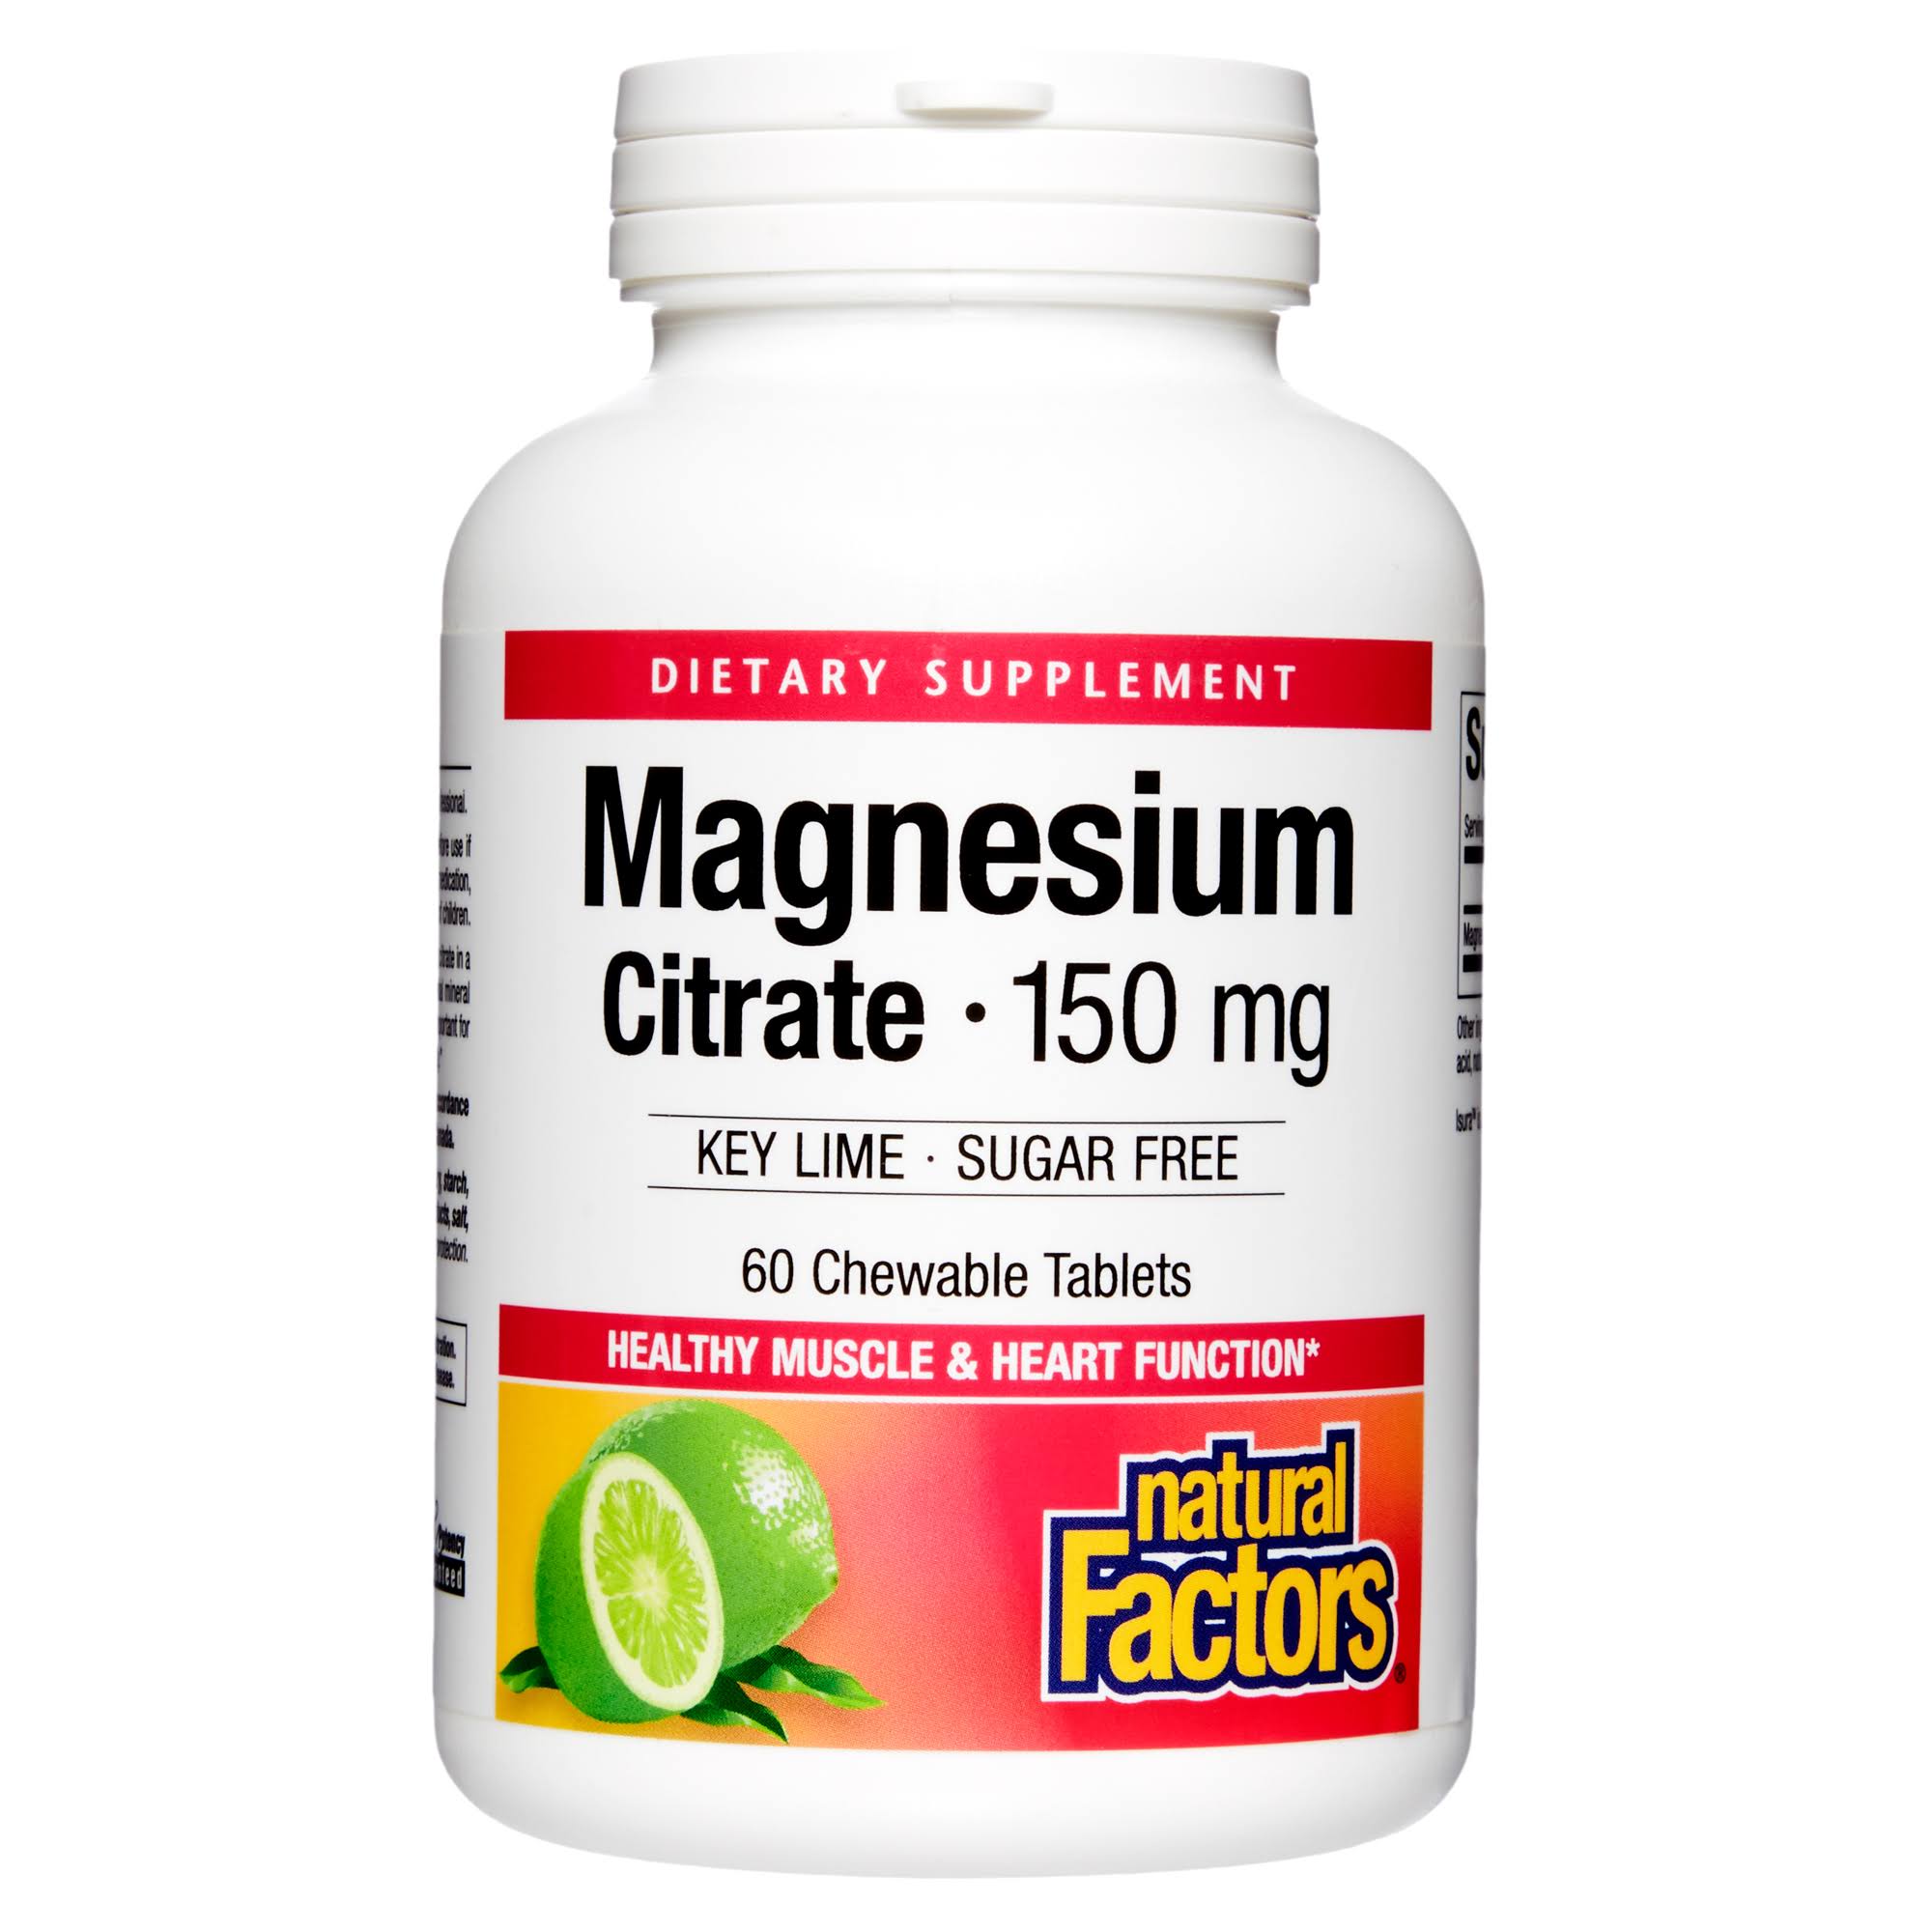 Natural Factors Magnesium Citrate 150mg Key Lime 60 Chewable Tablets